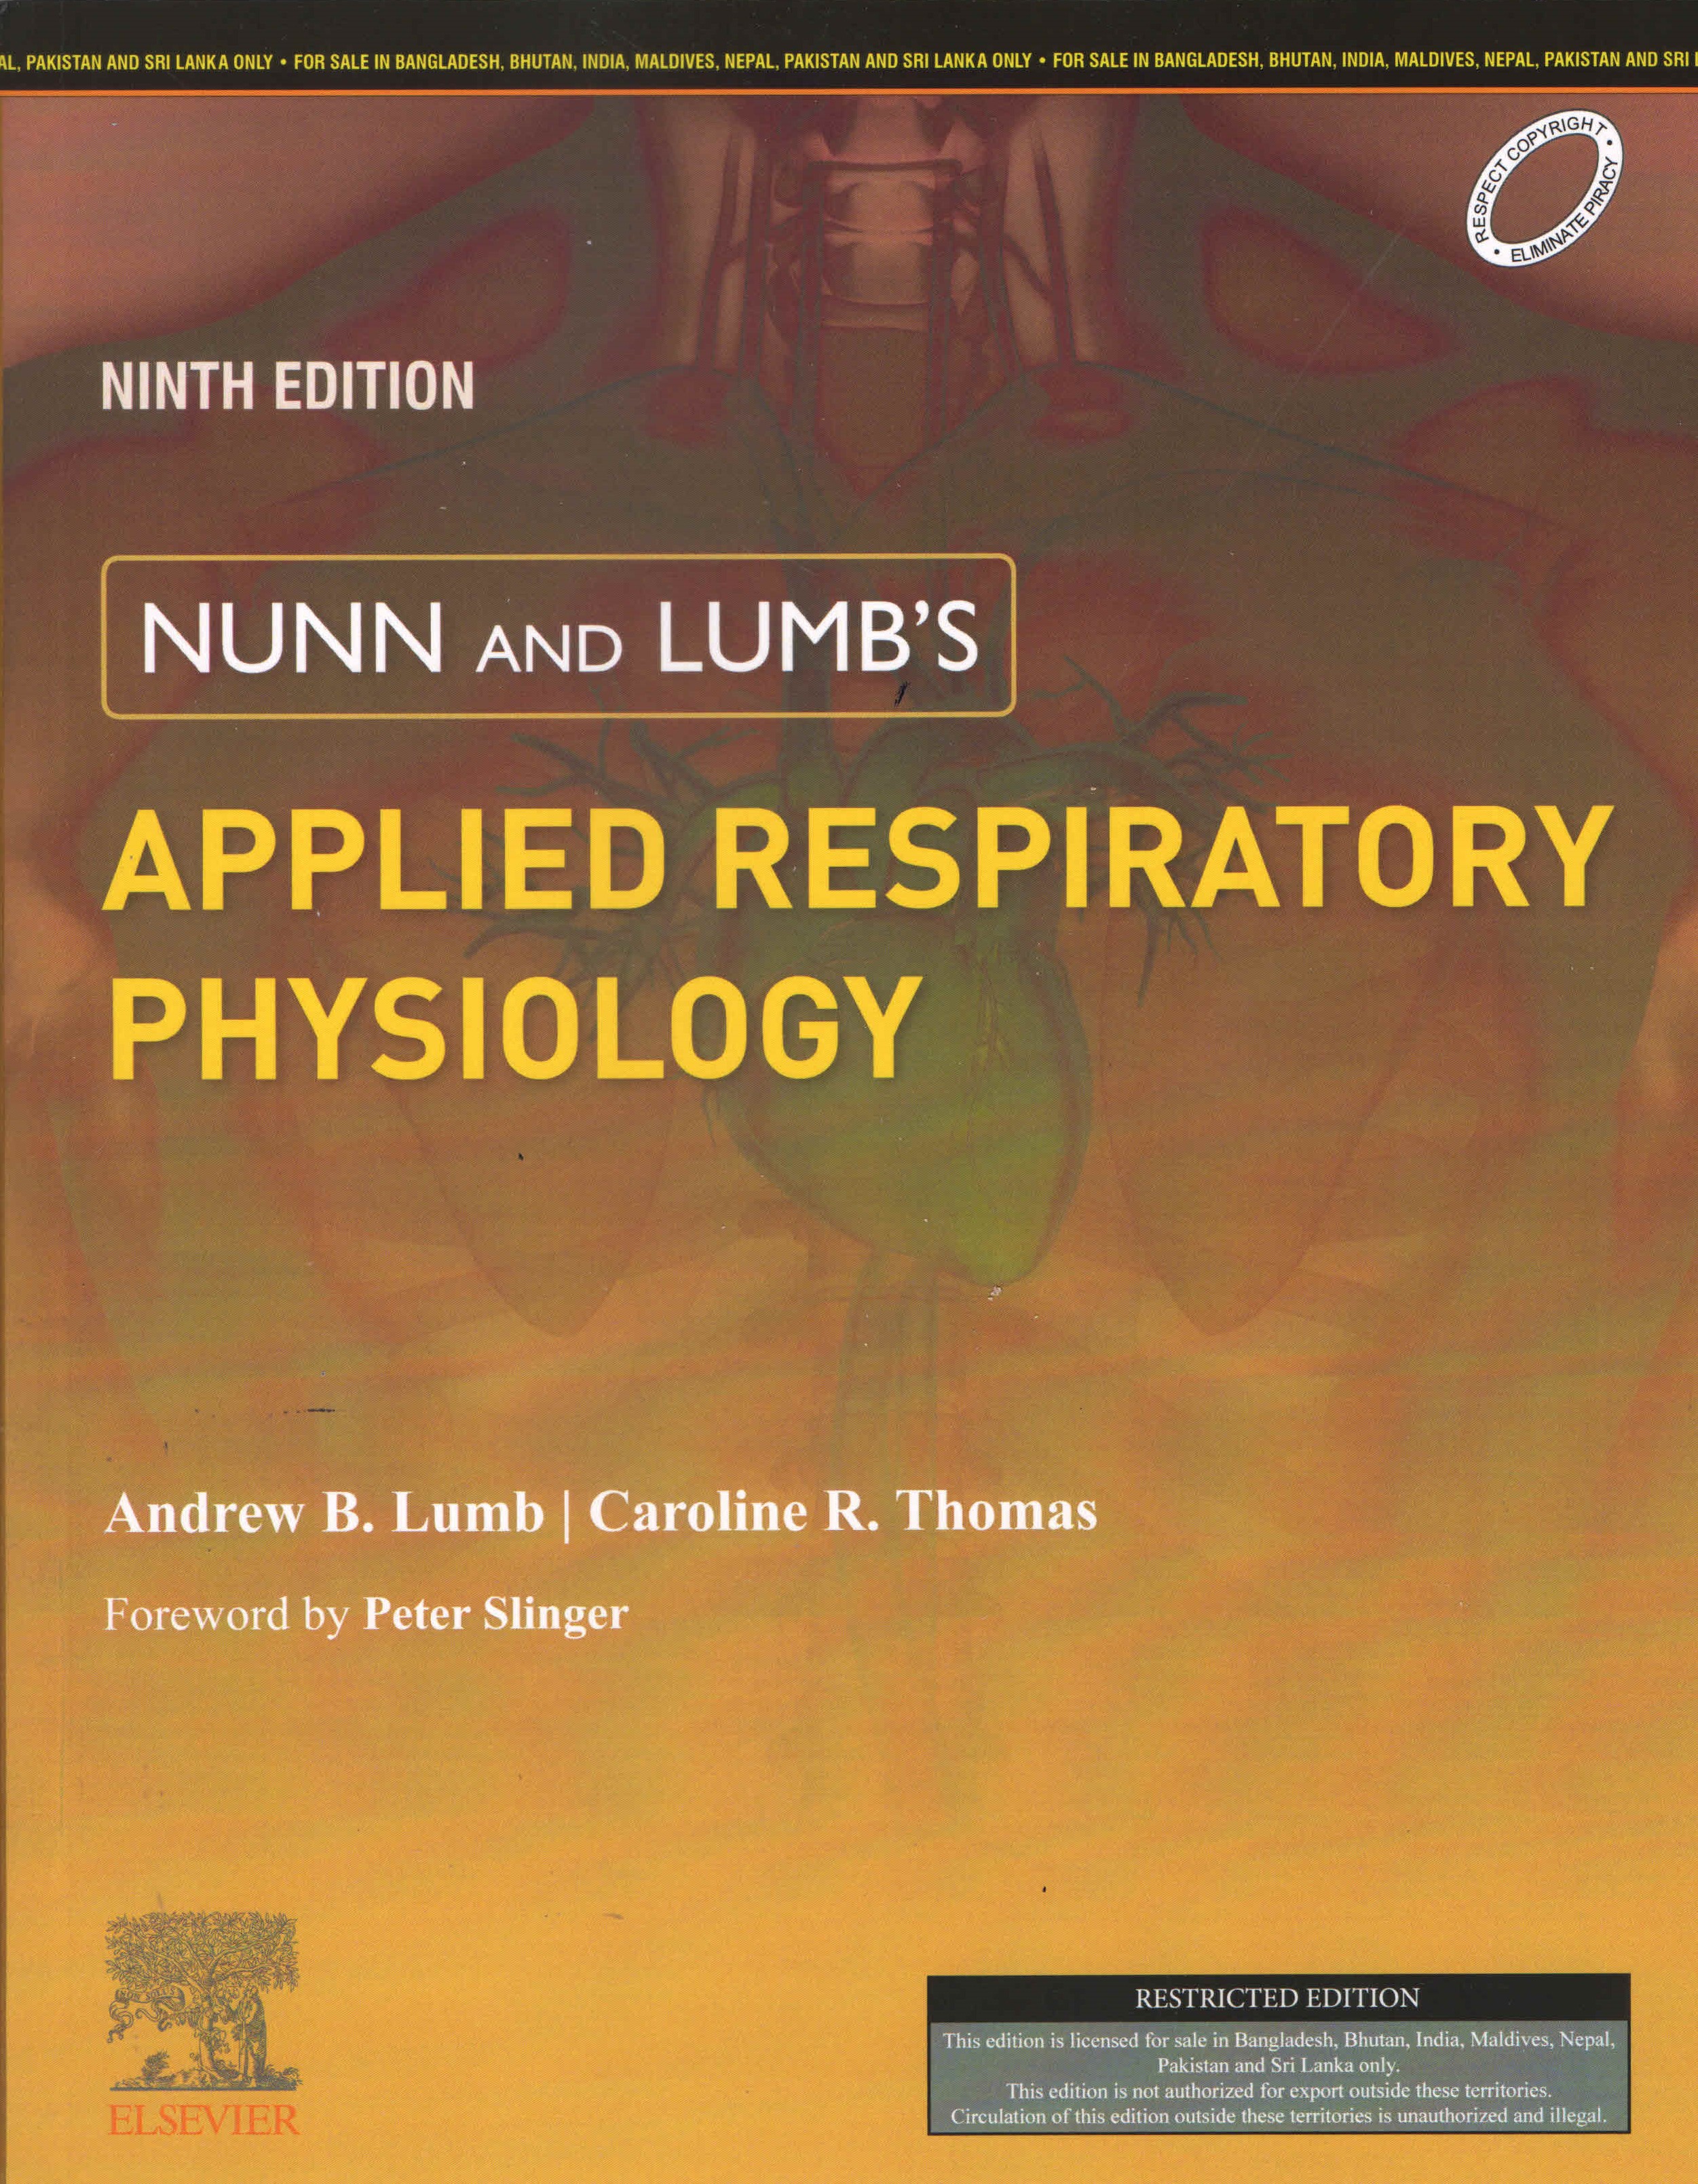 exclusive-publishers/elsevier/nunn-and-lumb-s-applied-respiratory-physiology-9ed-9788131264607